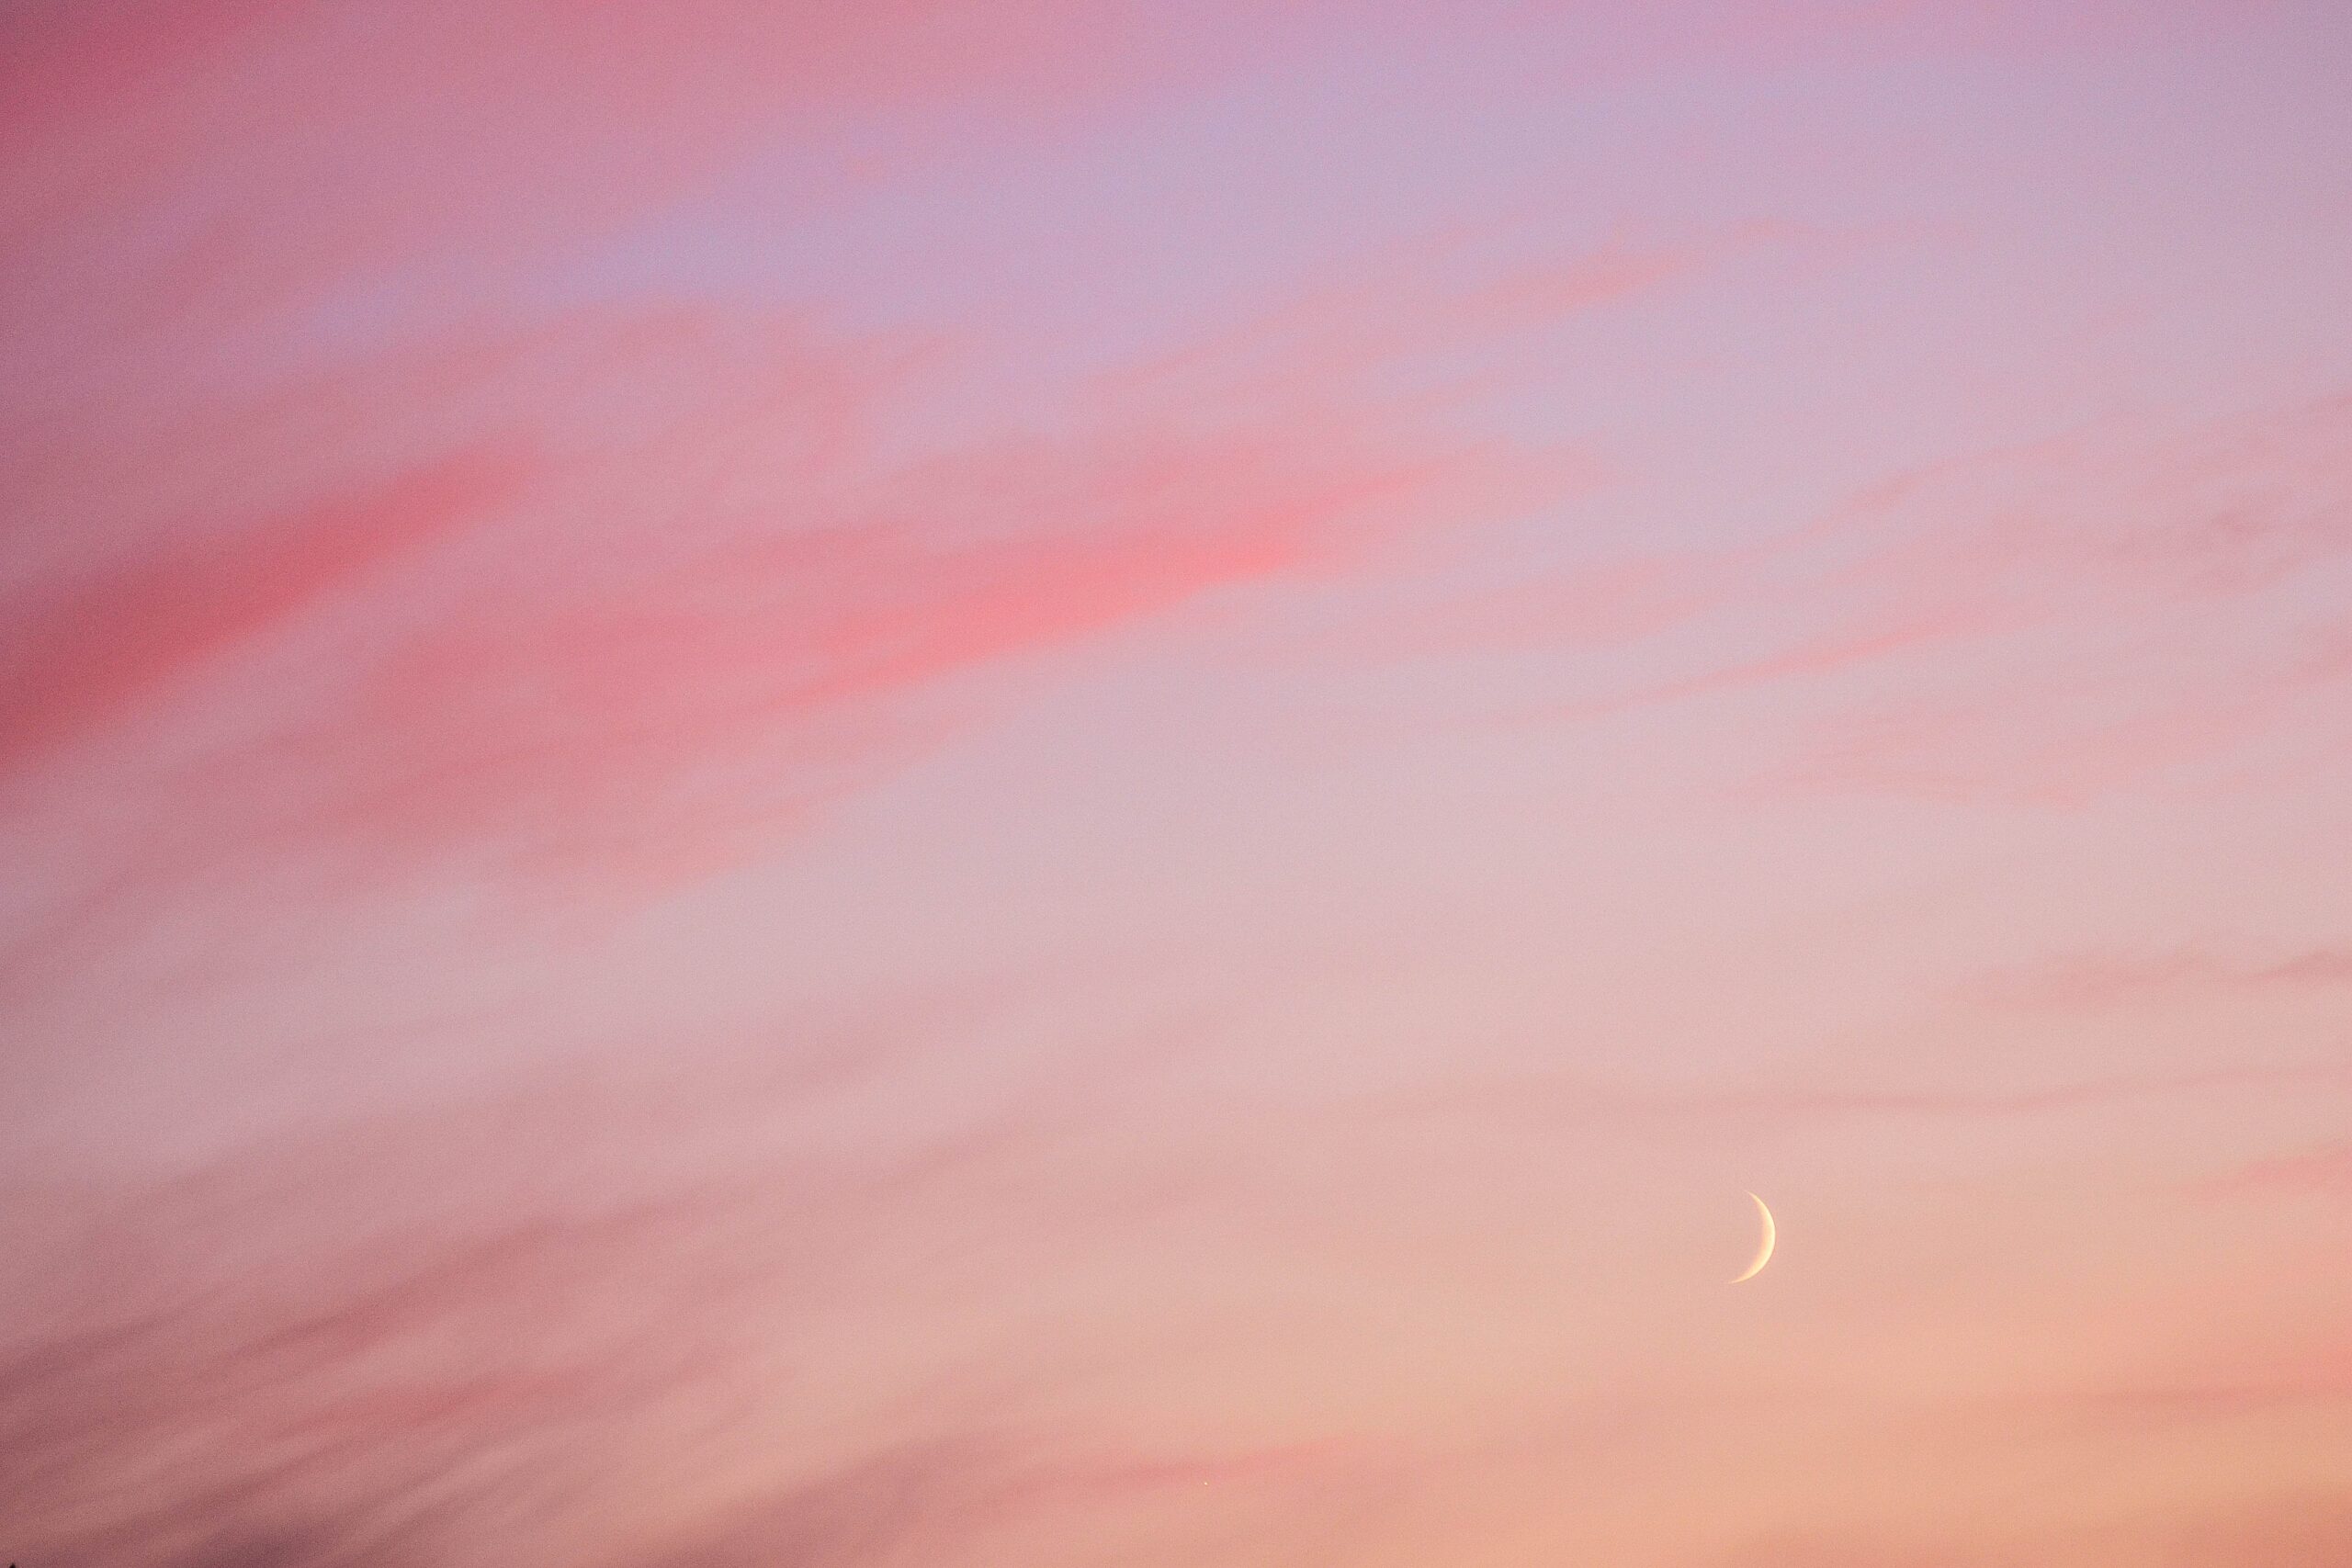 new moon in pink sky at sunrise